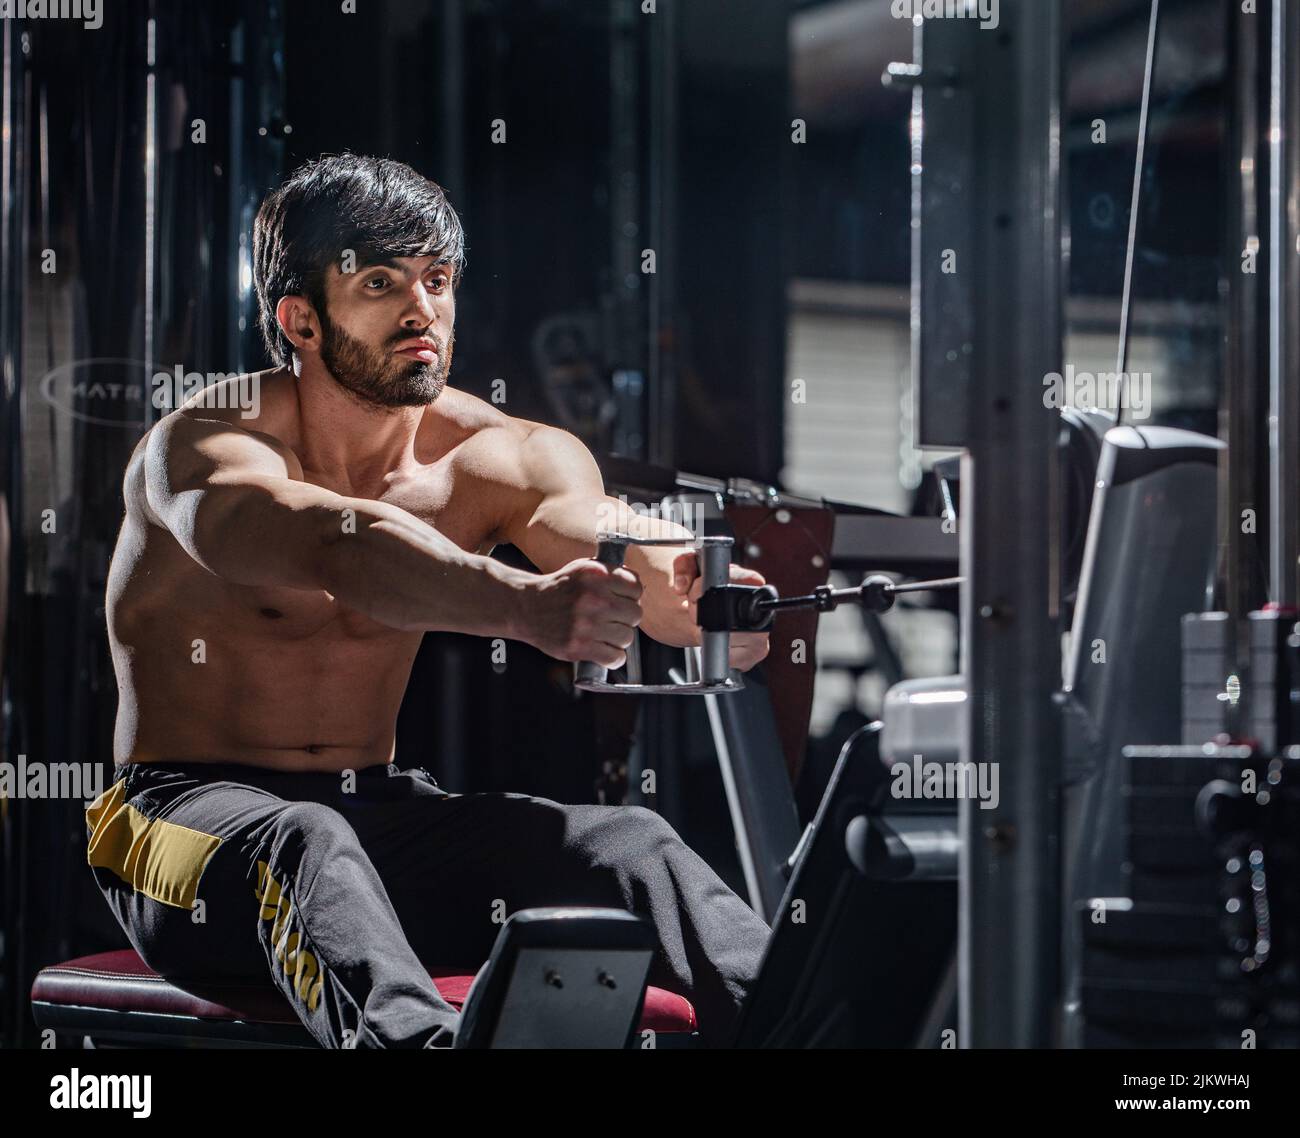 A fit athletic muscular Caucasian man working out at the gym Stock Photo